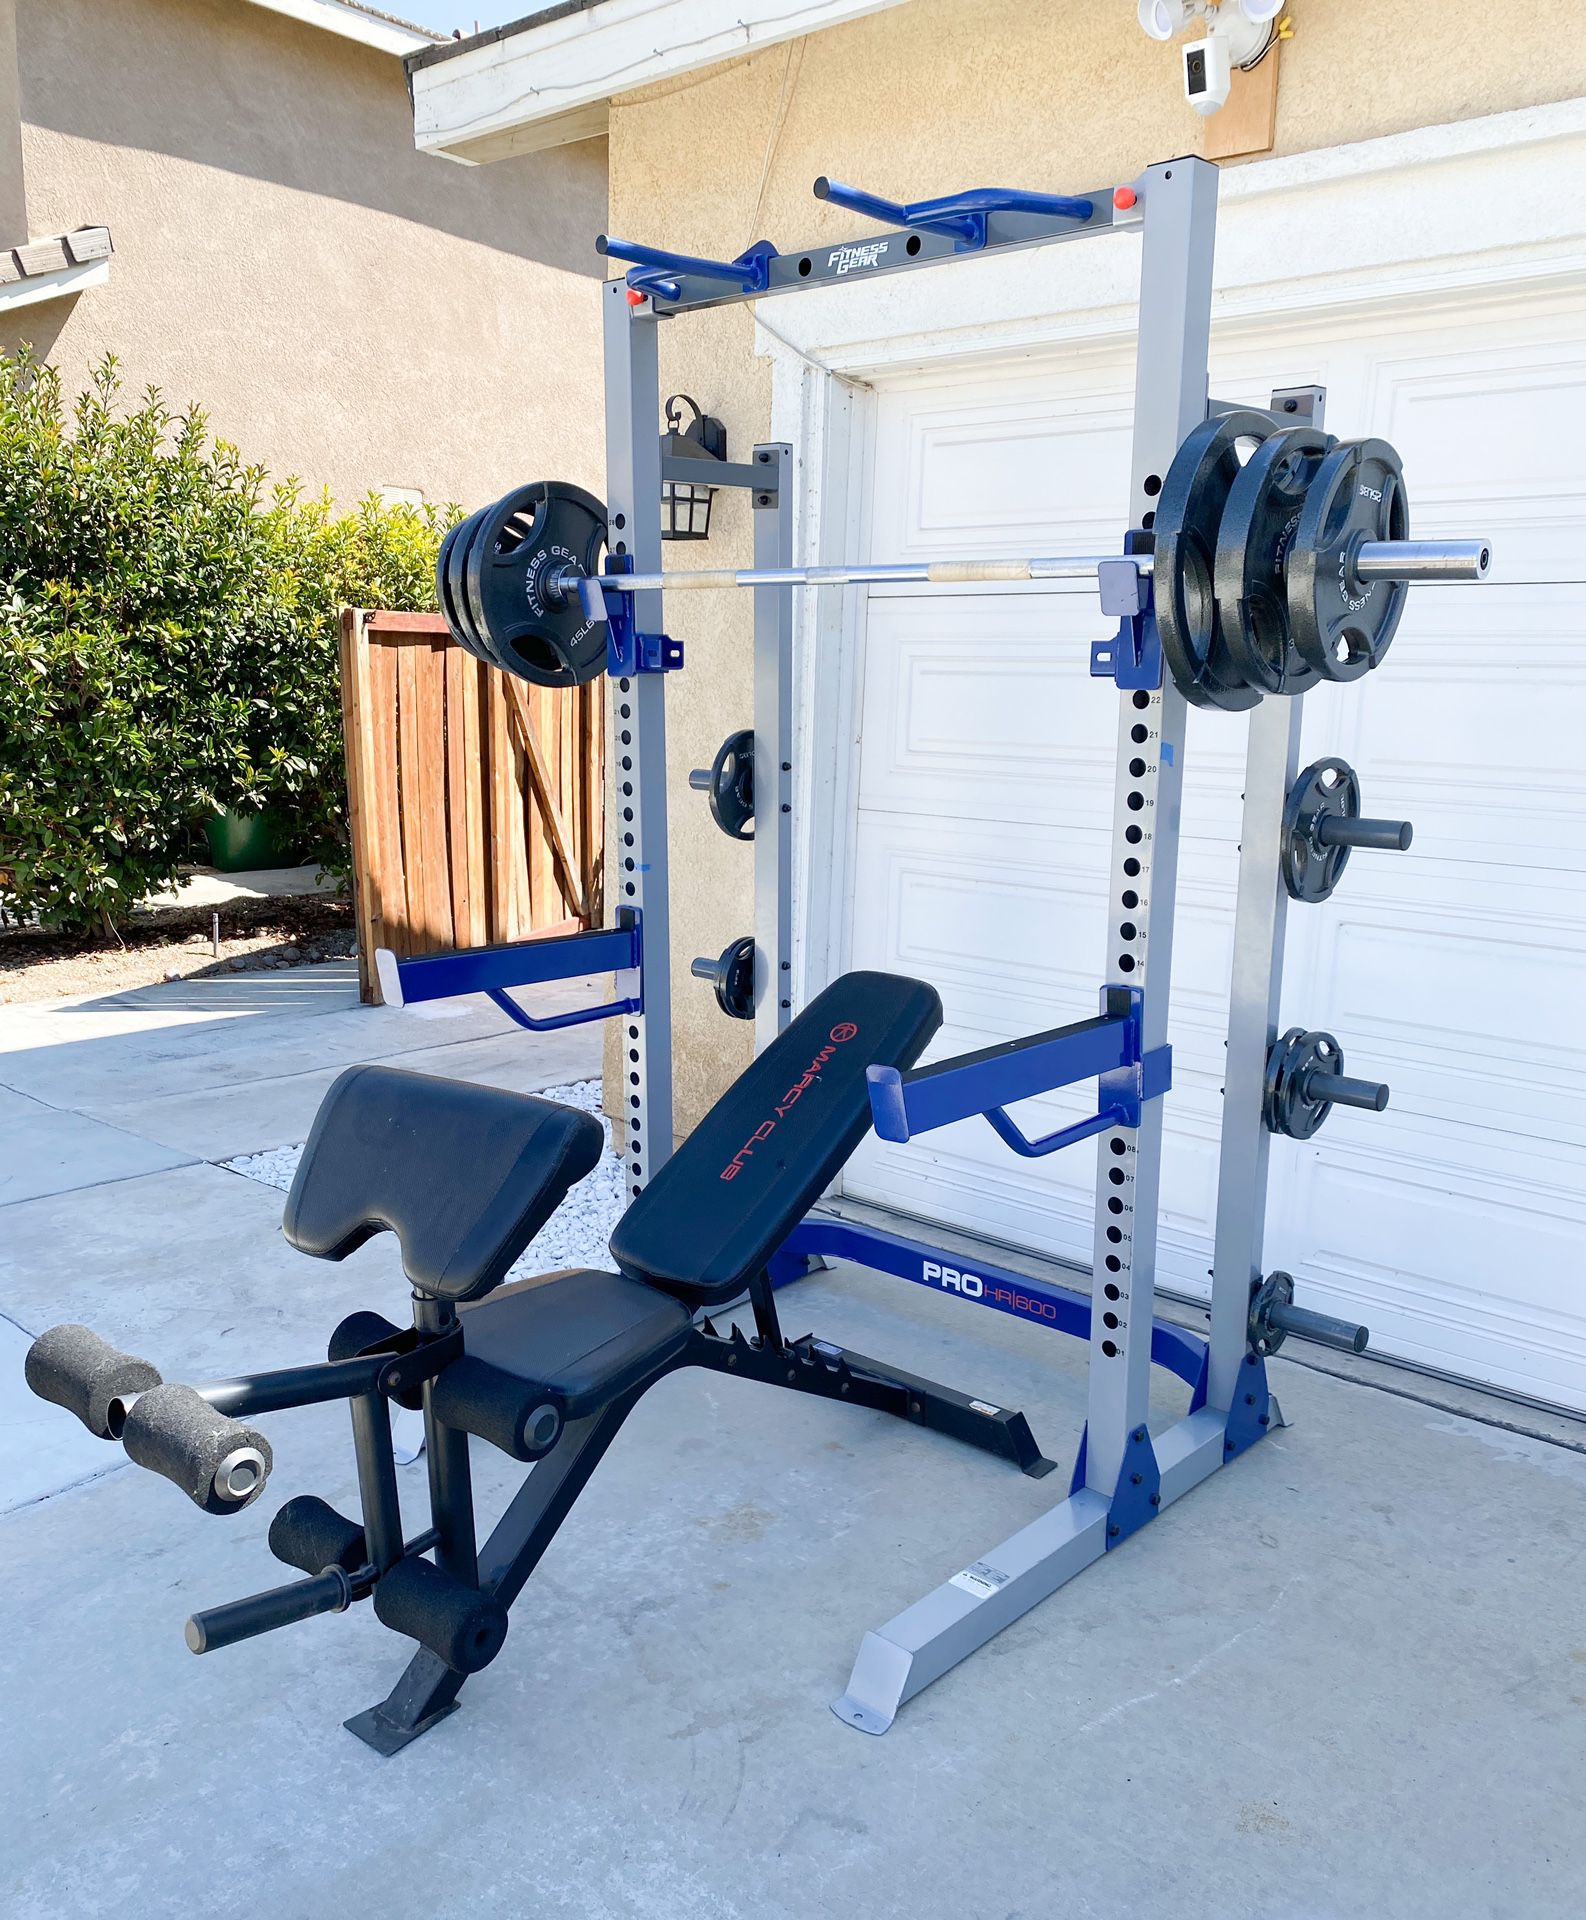 SQUAT RACK BENCH PRESS OLYMPIC BAR WEIGHTS INCLUDED 245LBS PU IN MENIFEE LAKES 